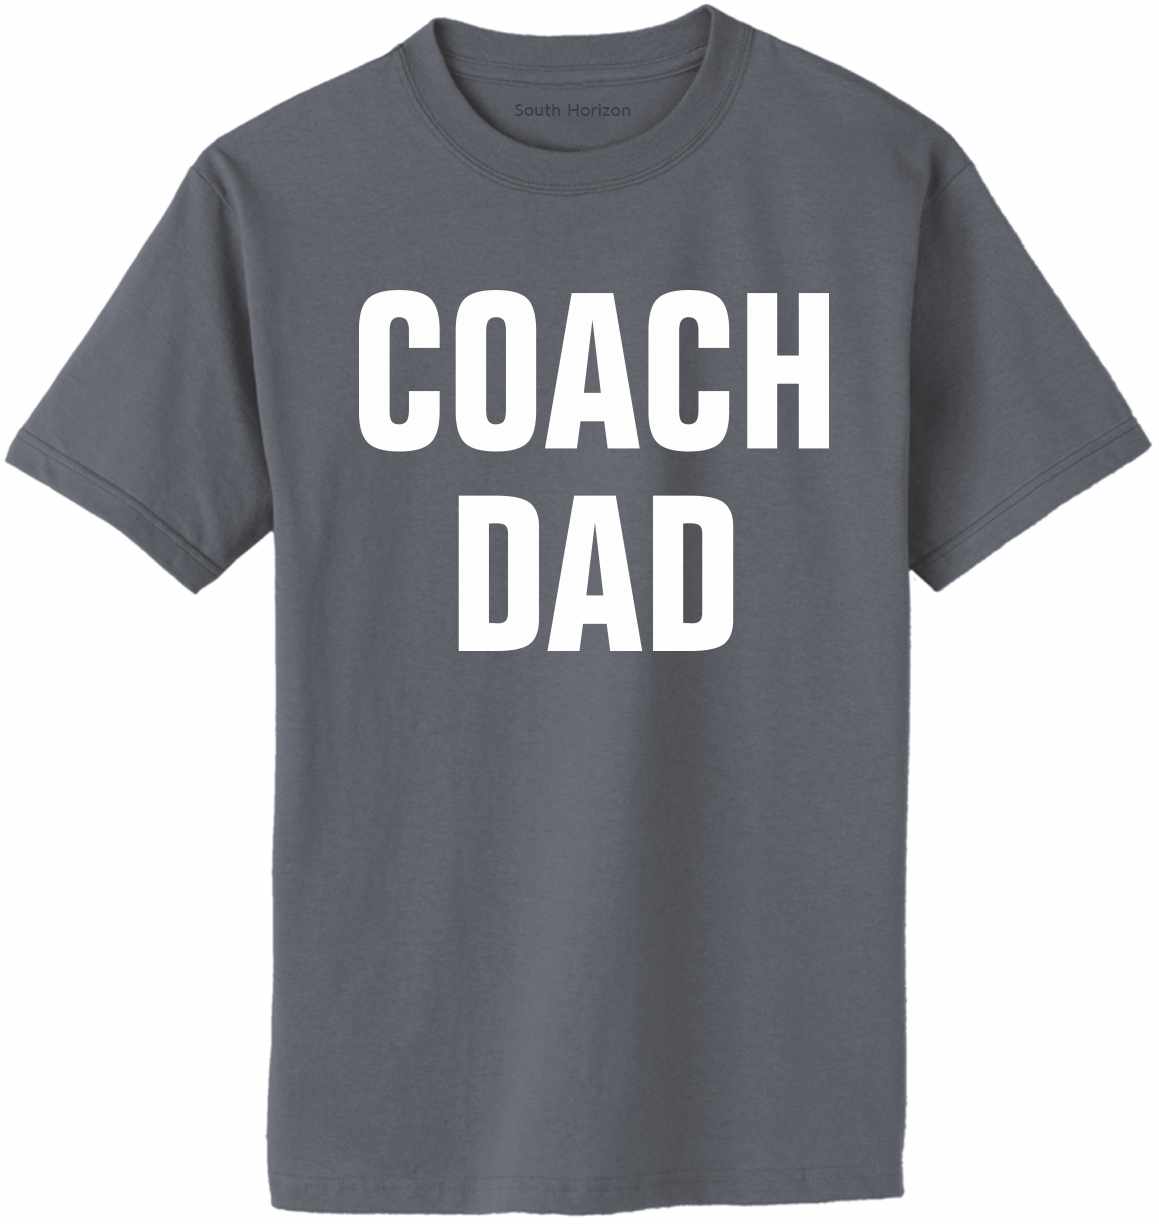 Coach Dad on Adult T-Shirt (#1212-1)